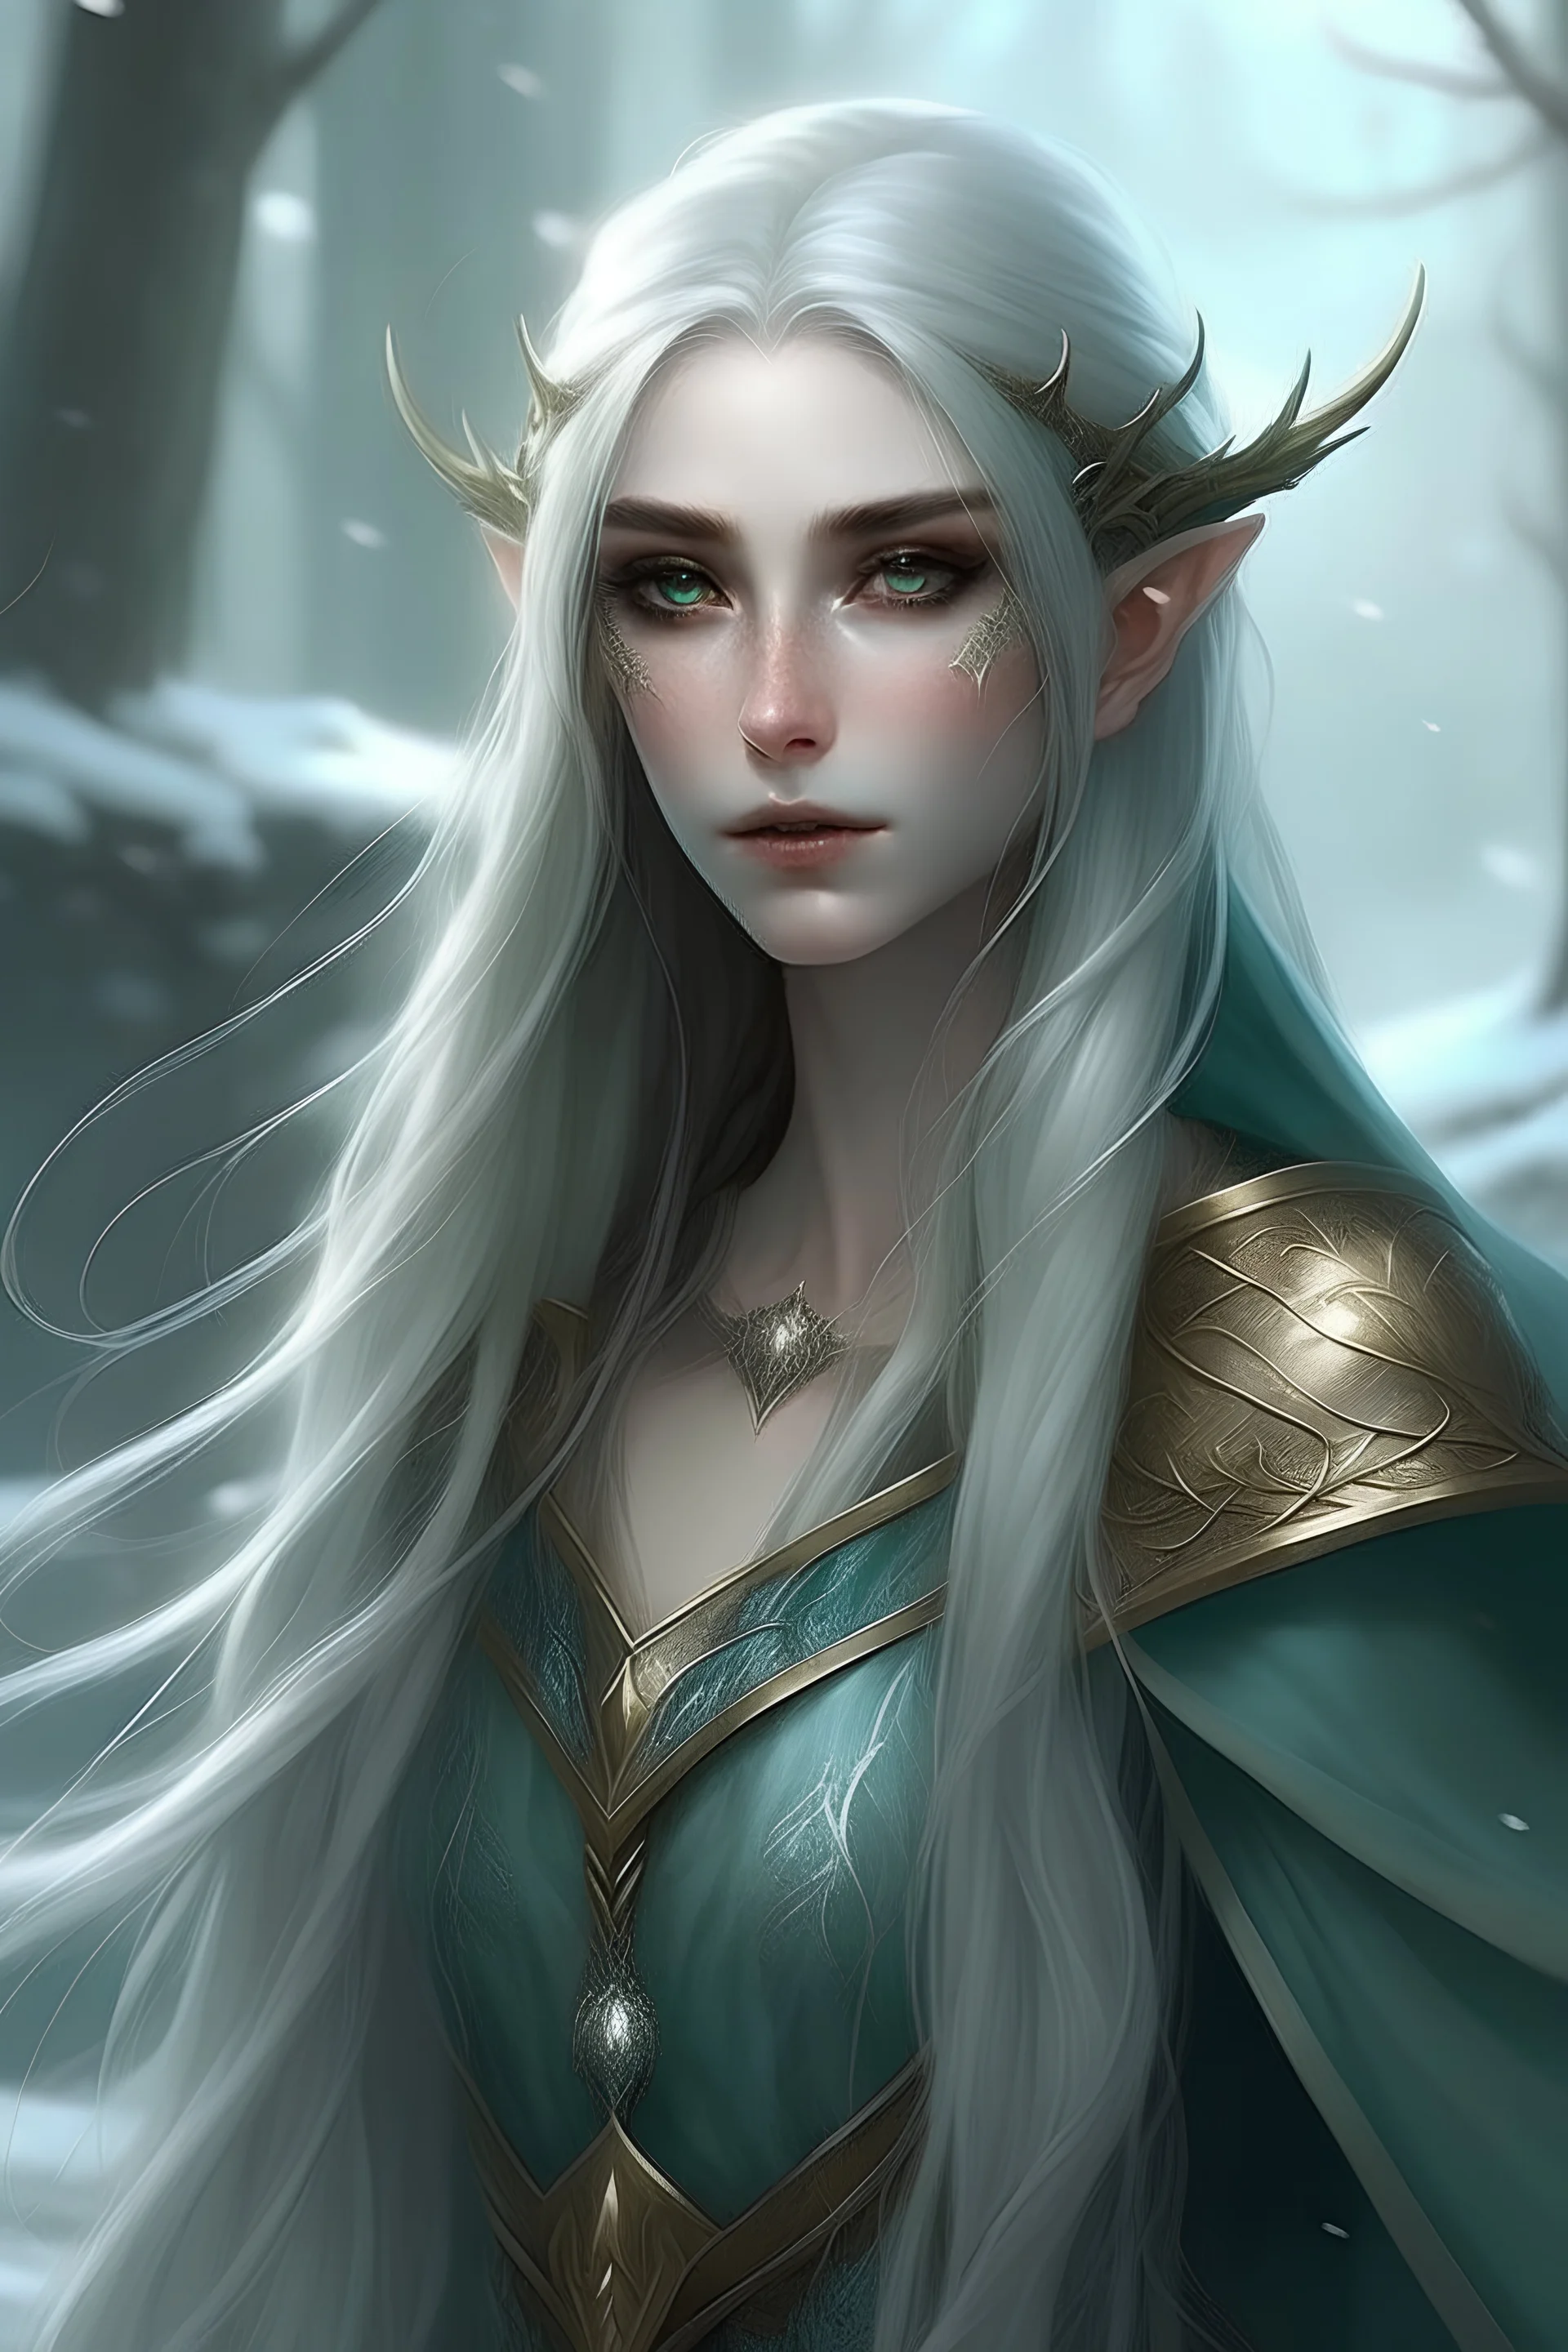 Elf queen with long hair and cold look